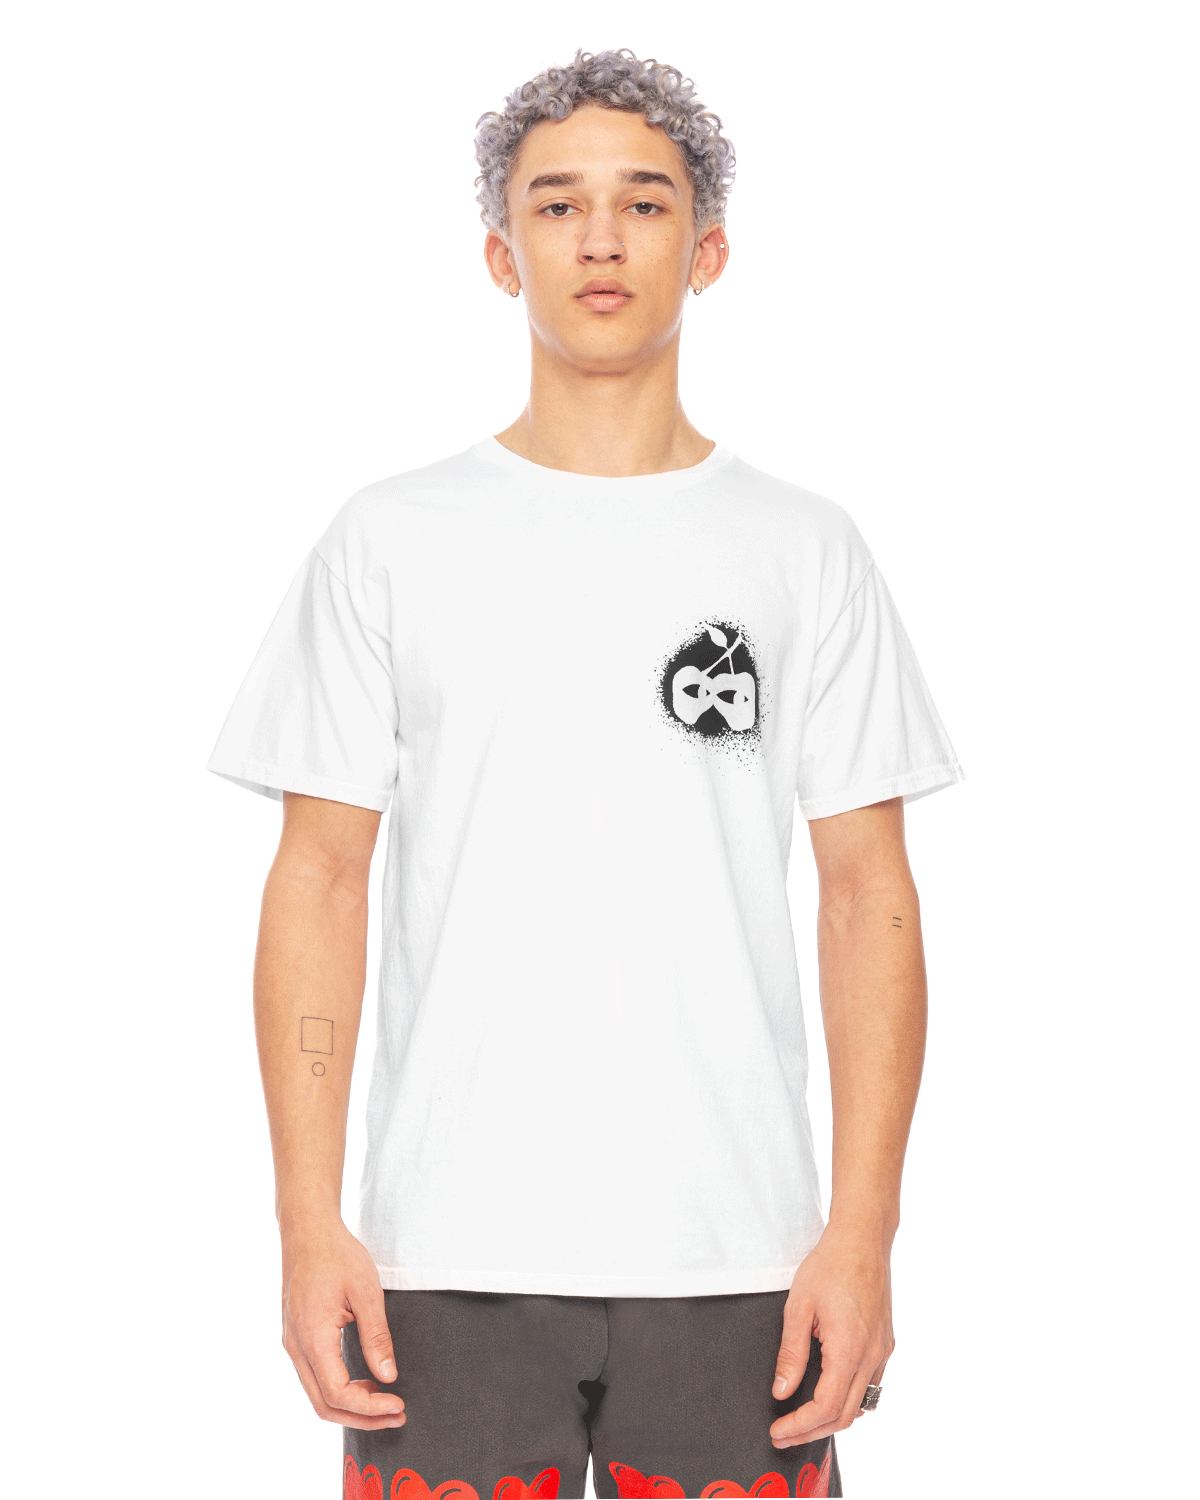 Real Bad Apples S/S Tee White